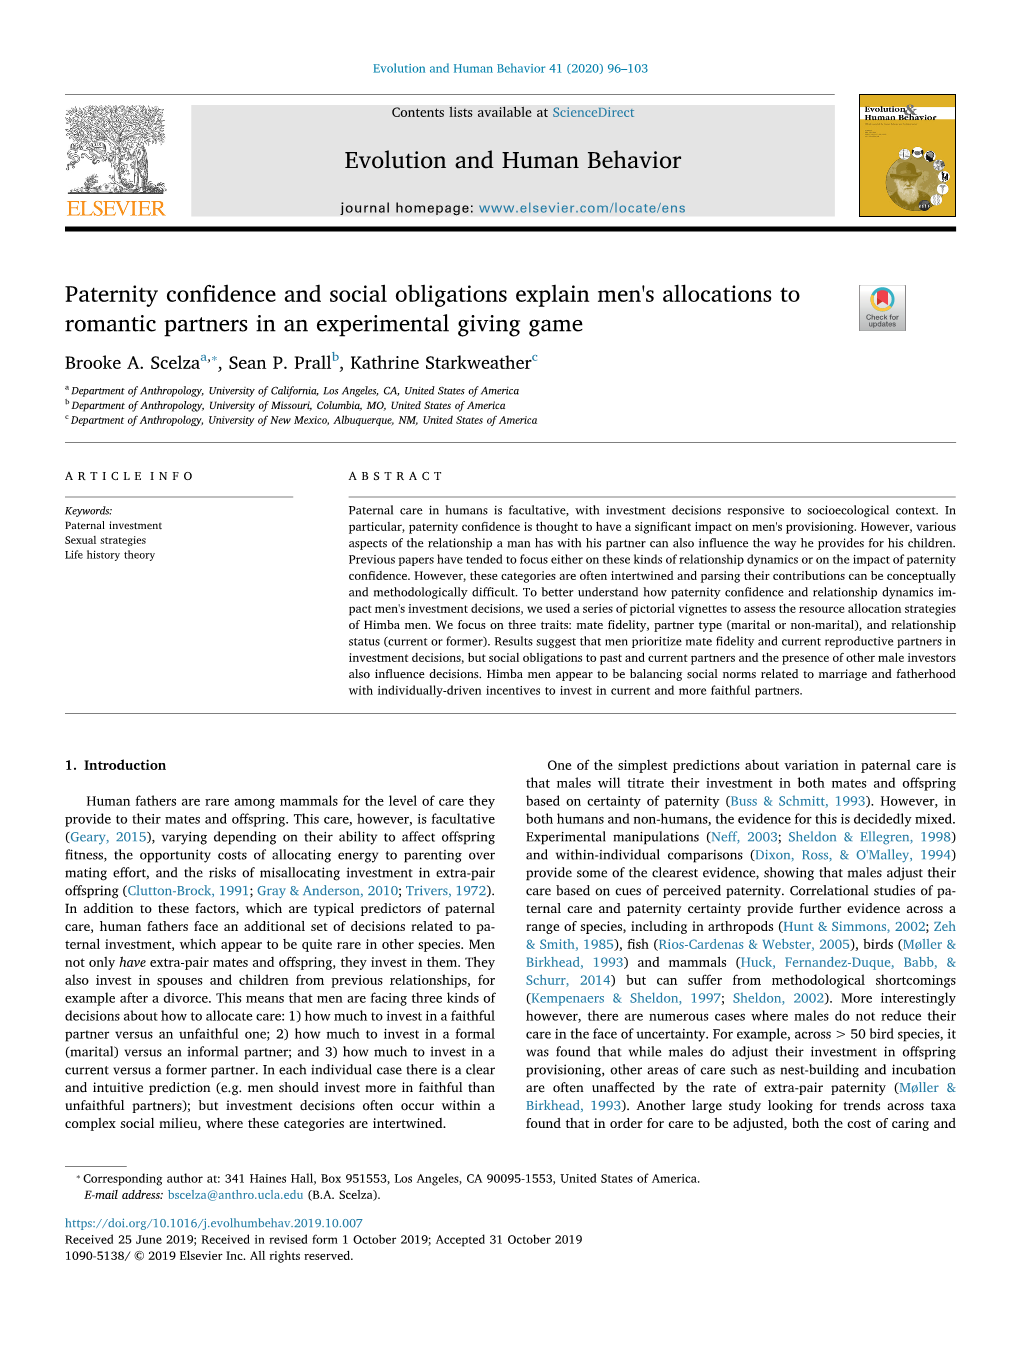 Evolution and Human Behavior Paternity Confidence and Social